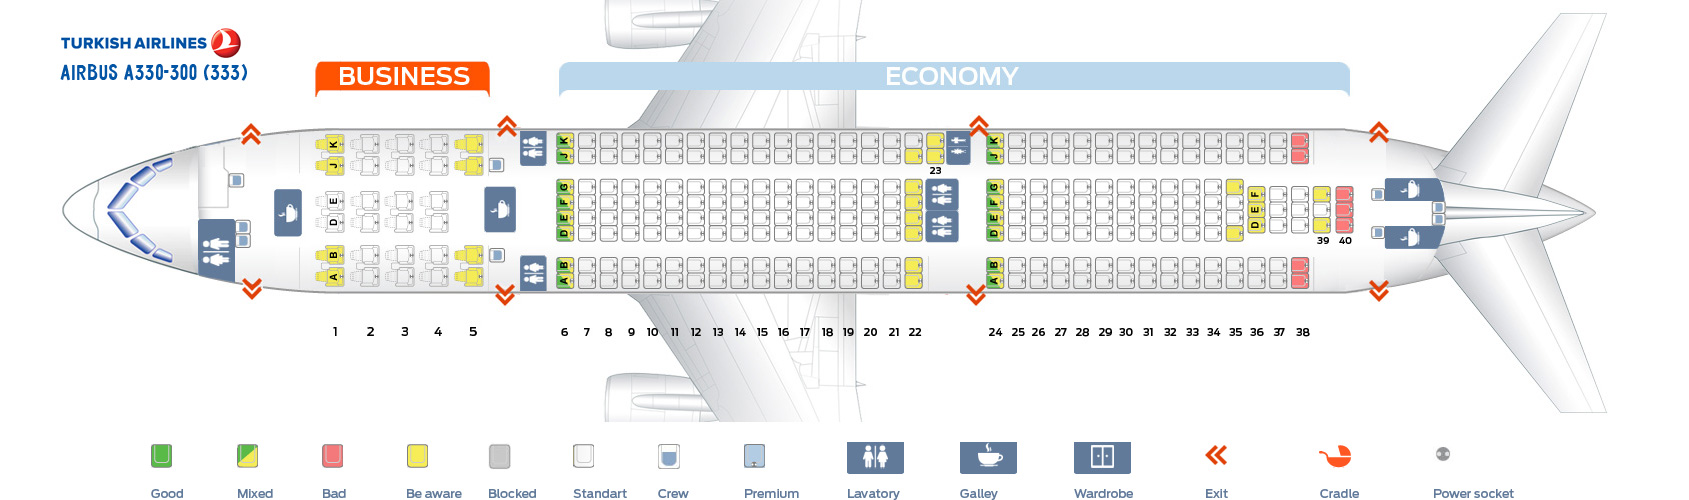 Airbus A330 302 Seating Chart